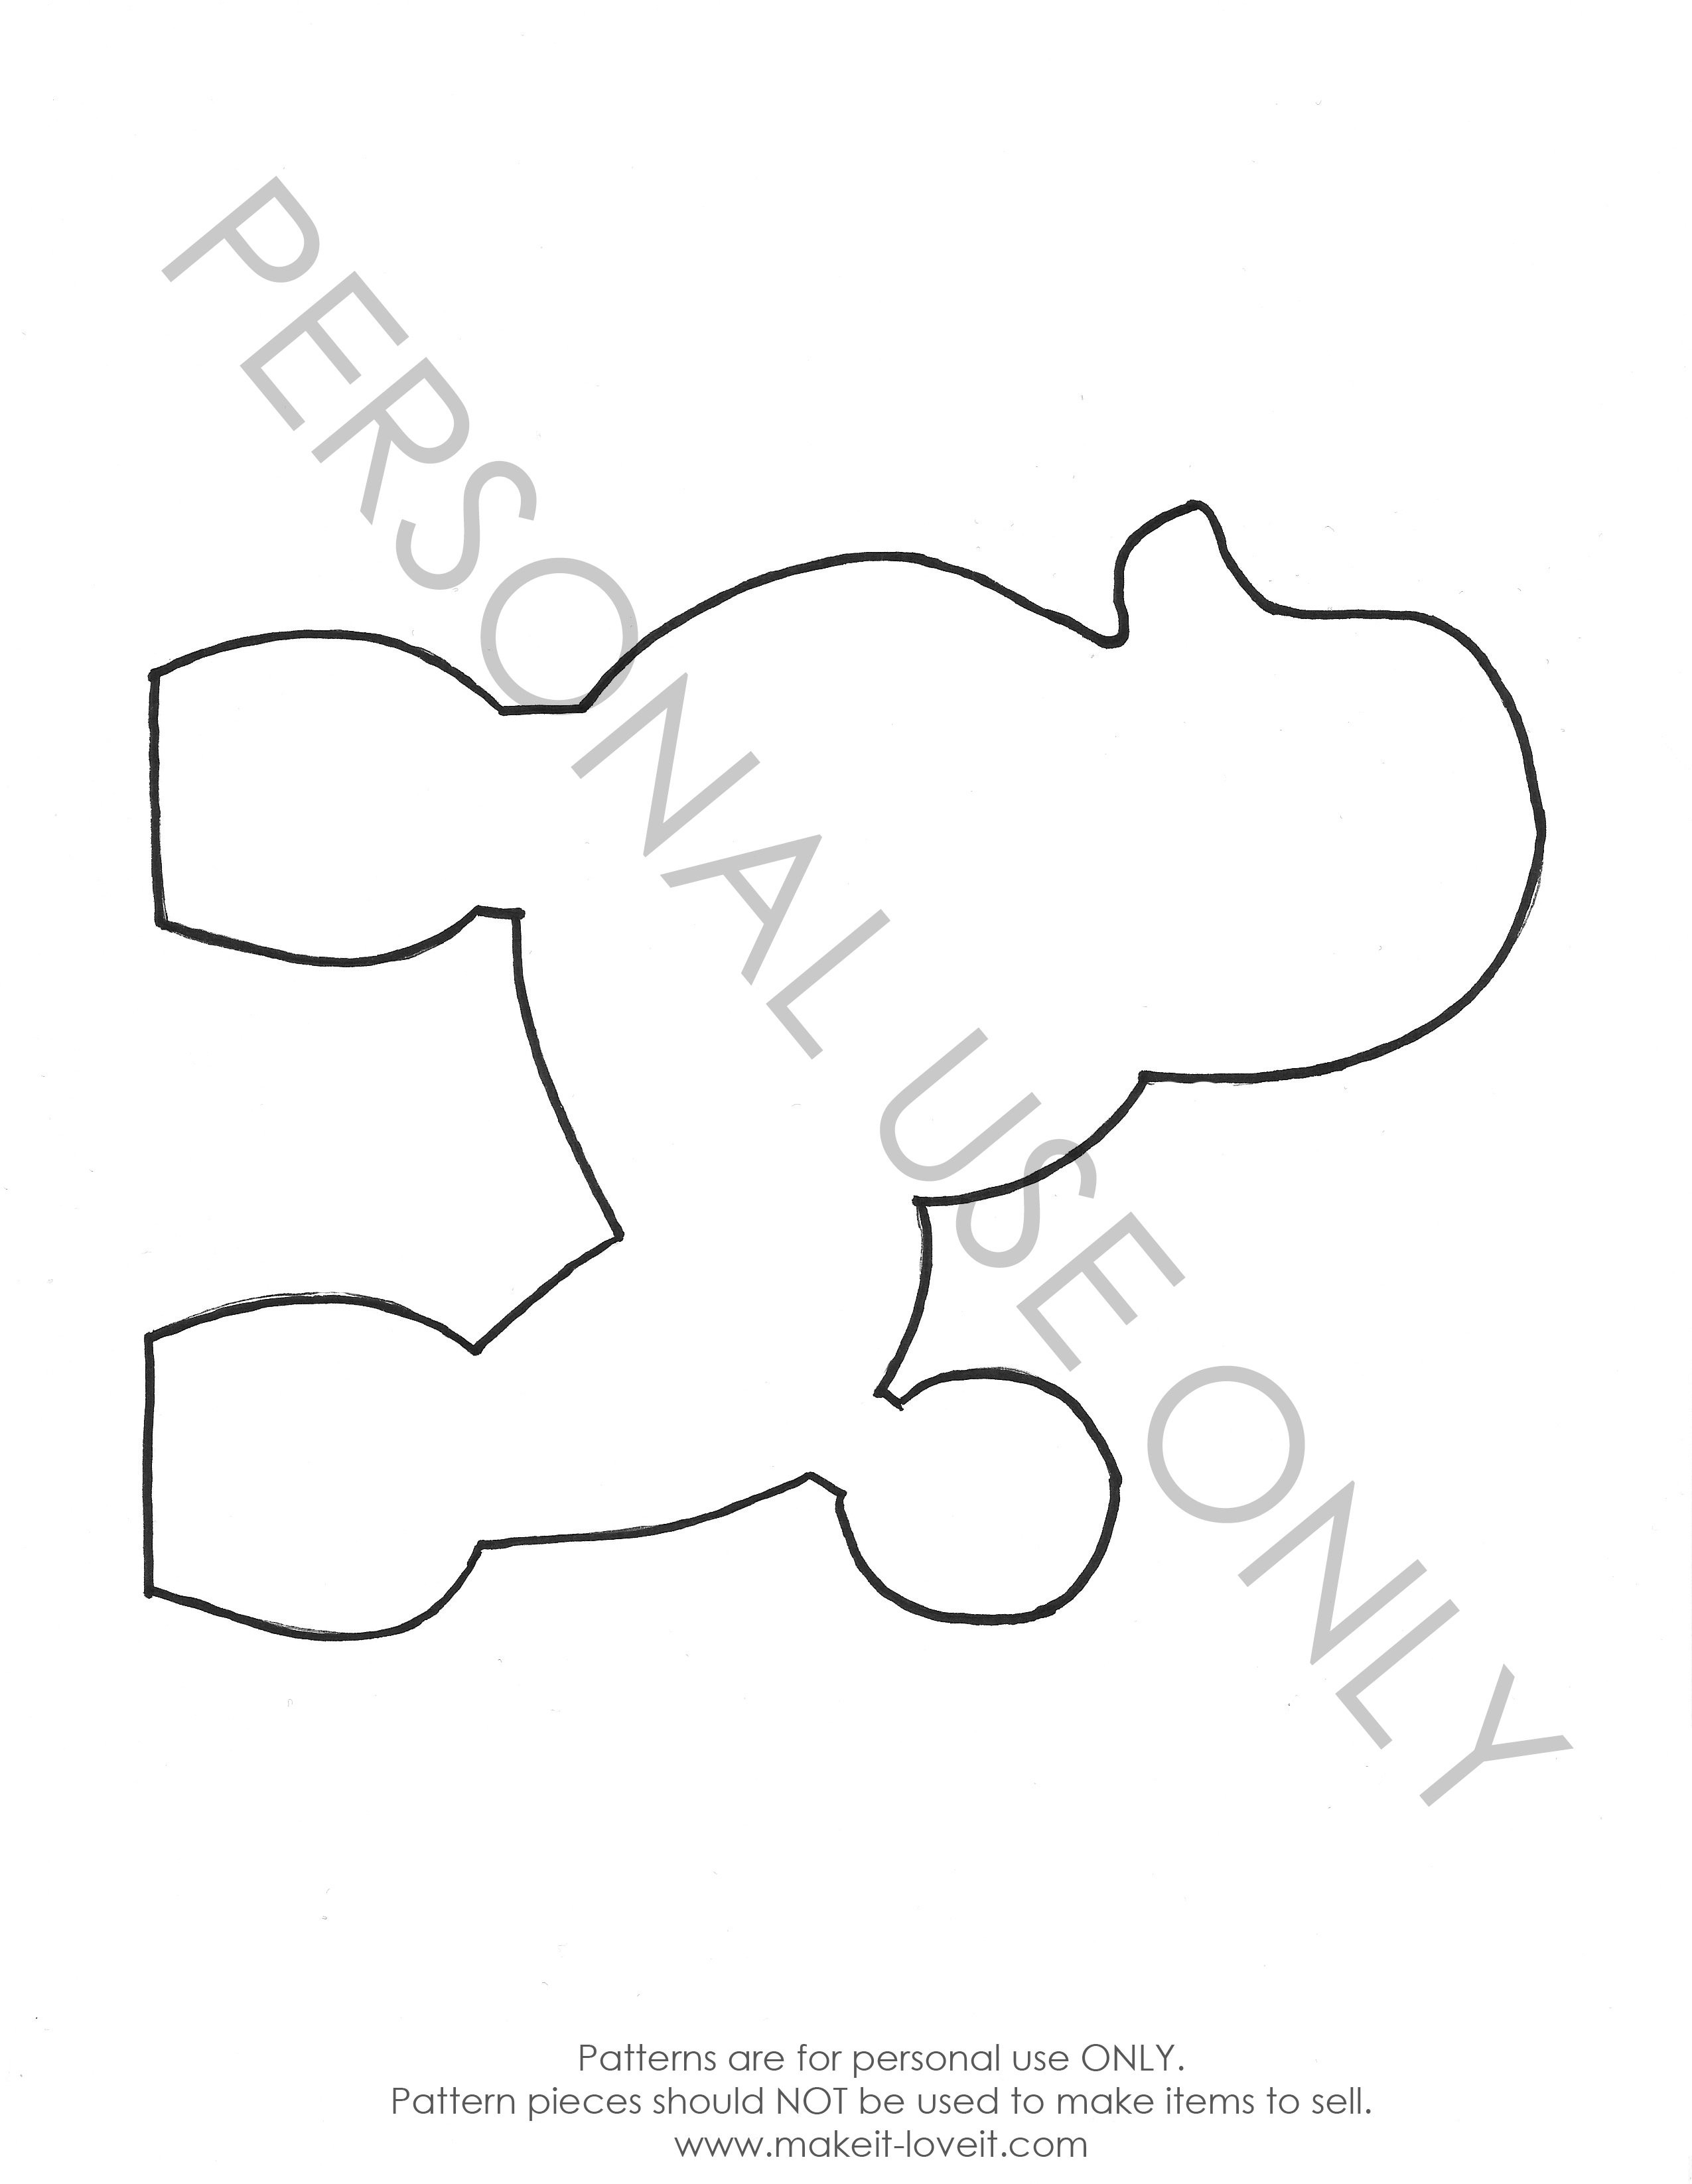 Poodle Outline Printable | Fiscalreform - Free Printable Poodle Template